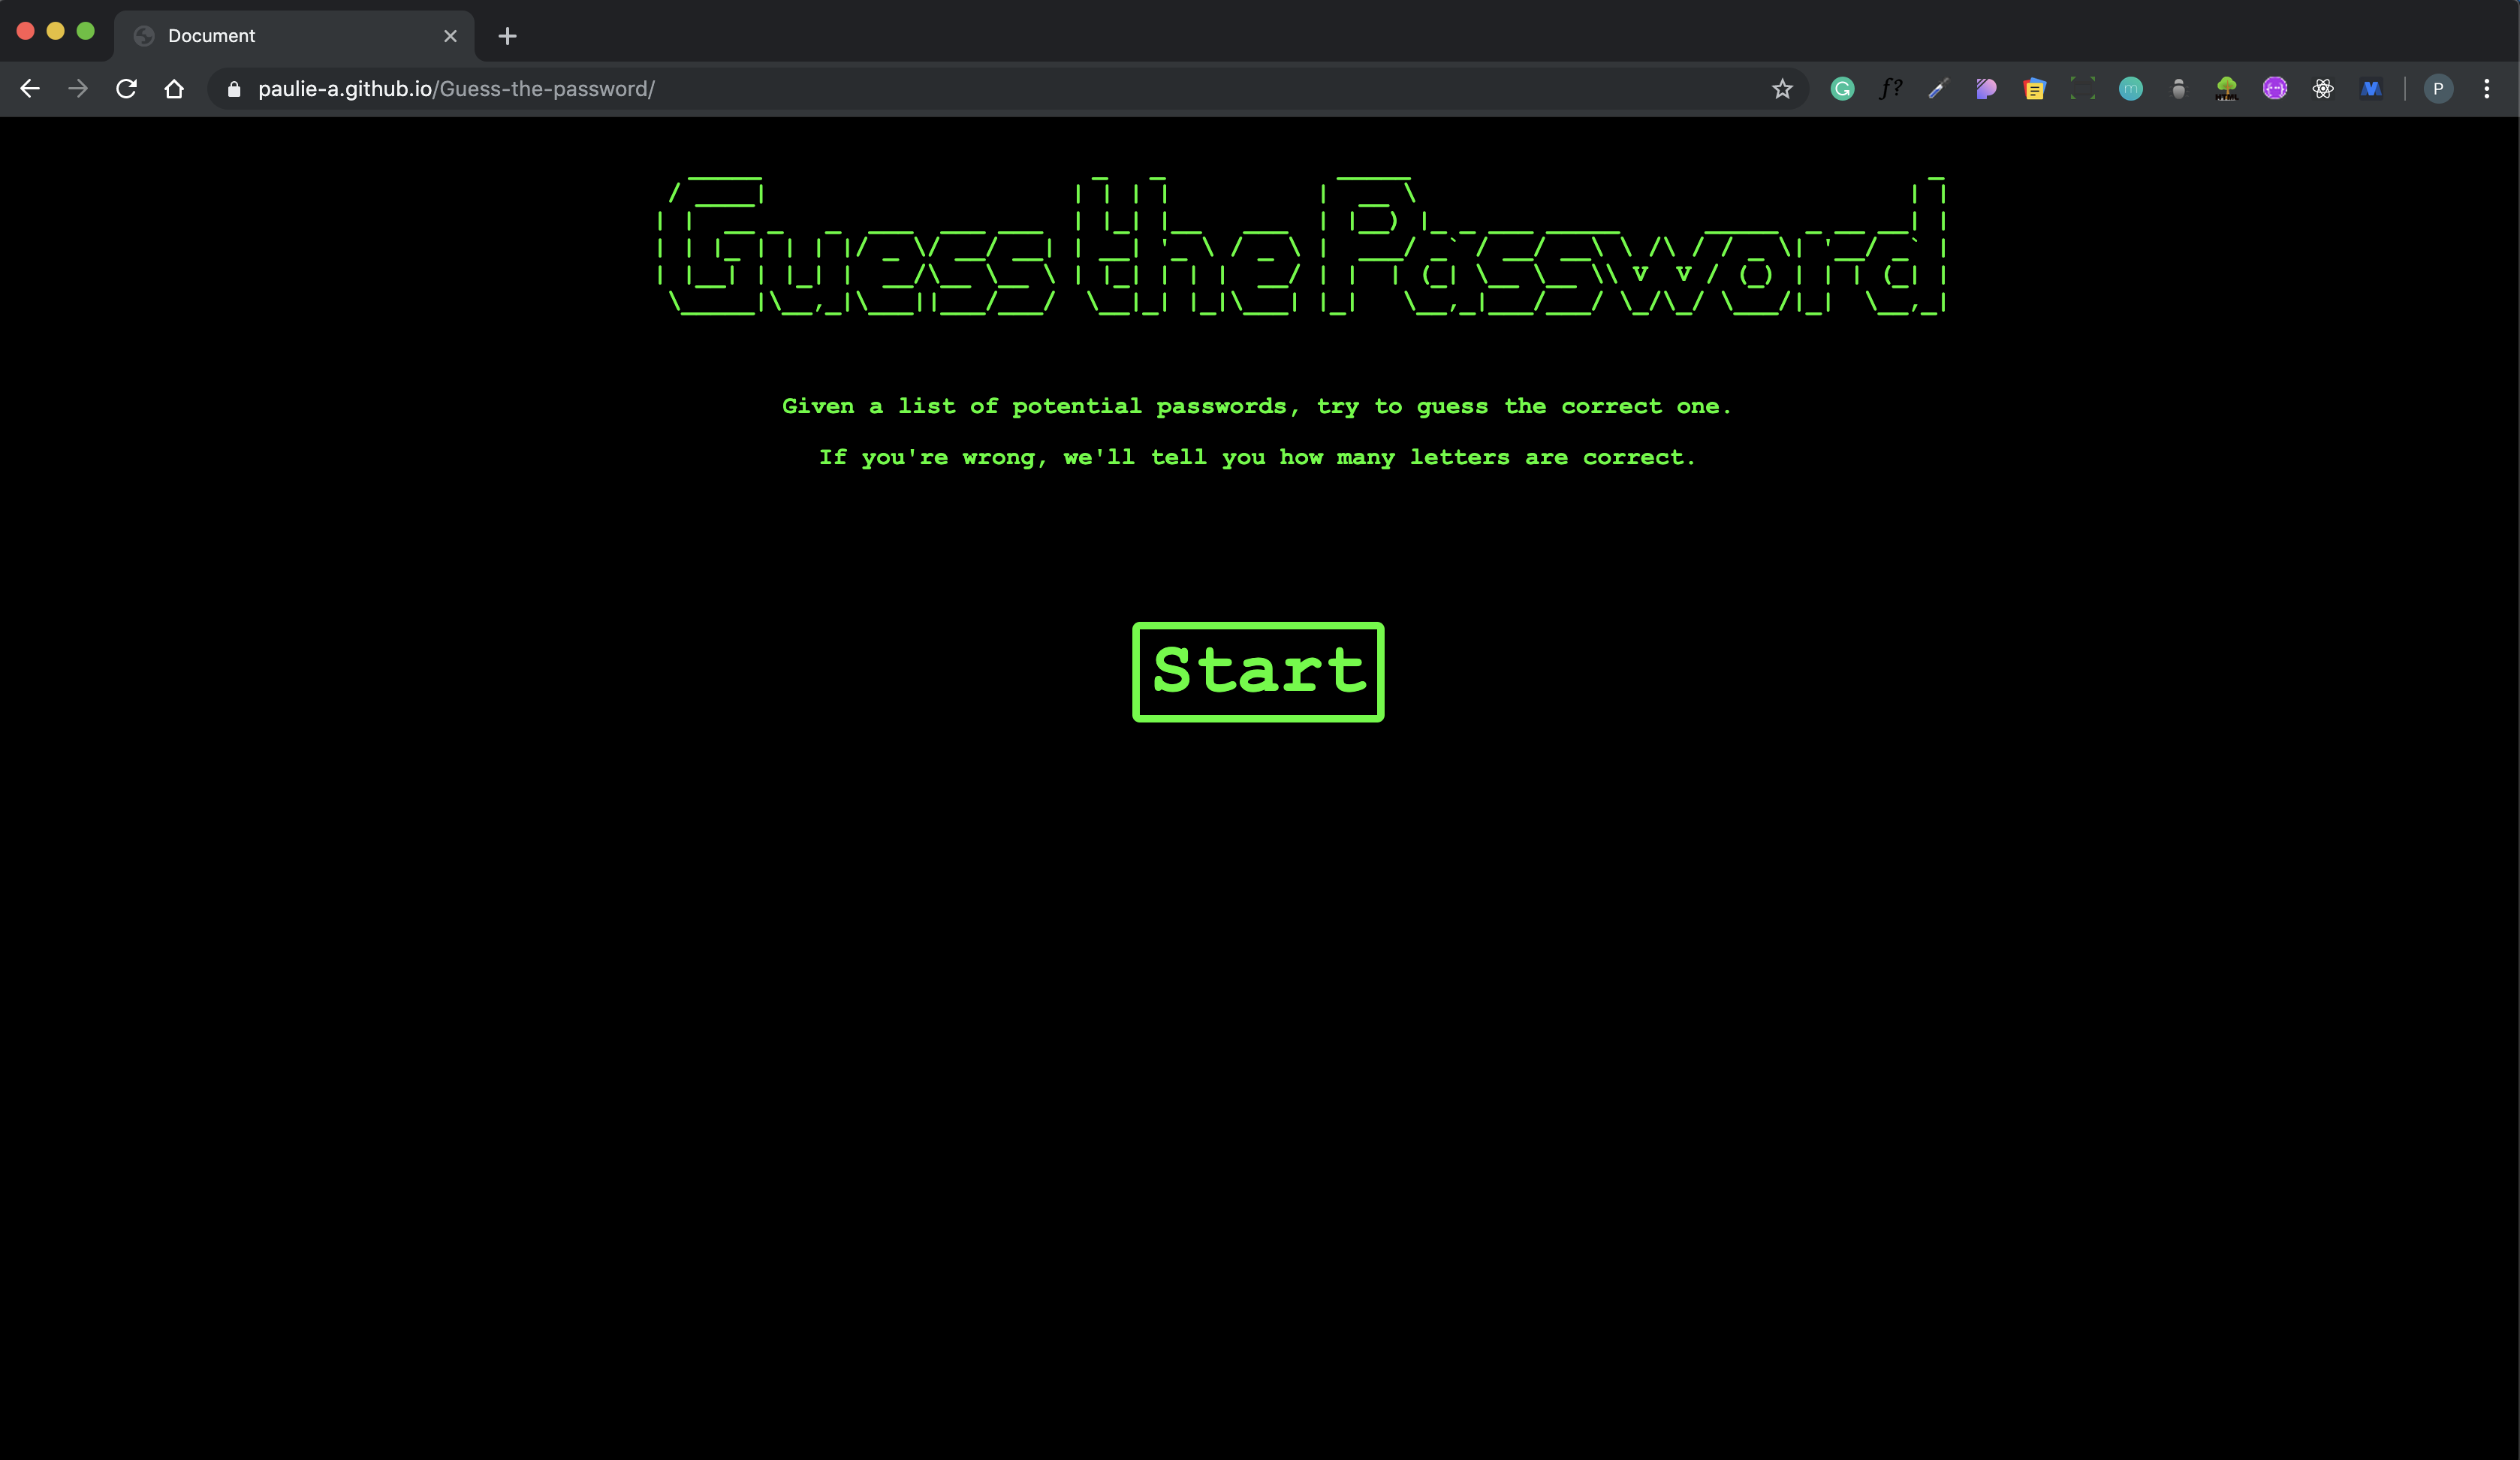 guess_the_password